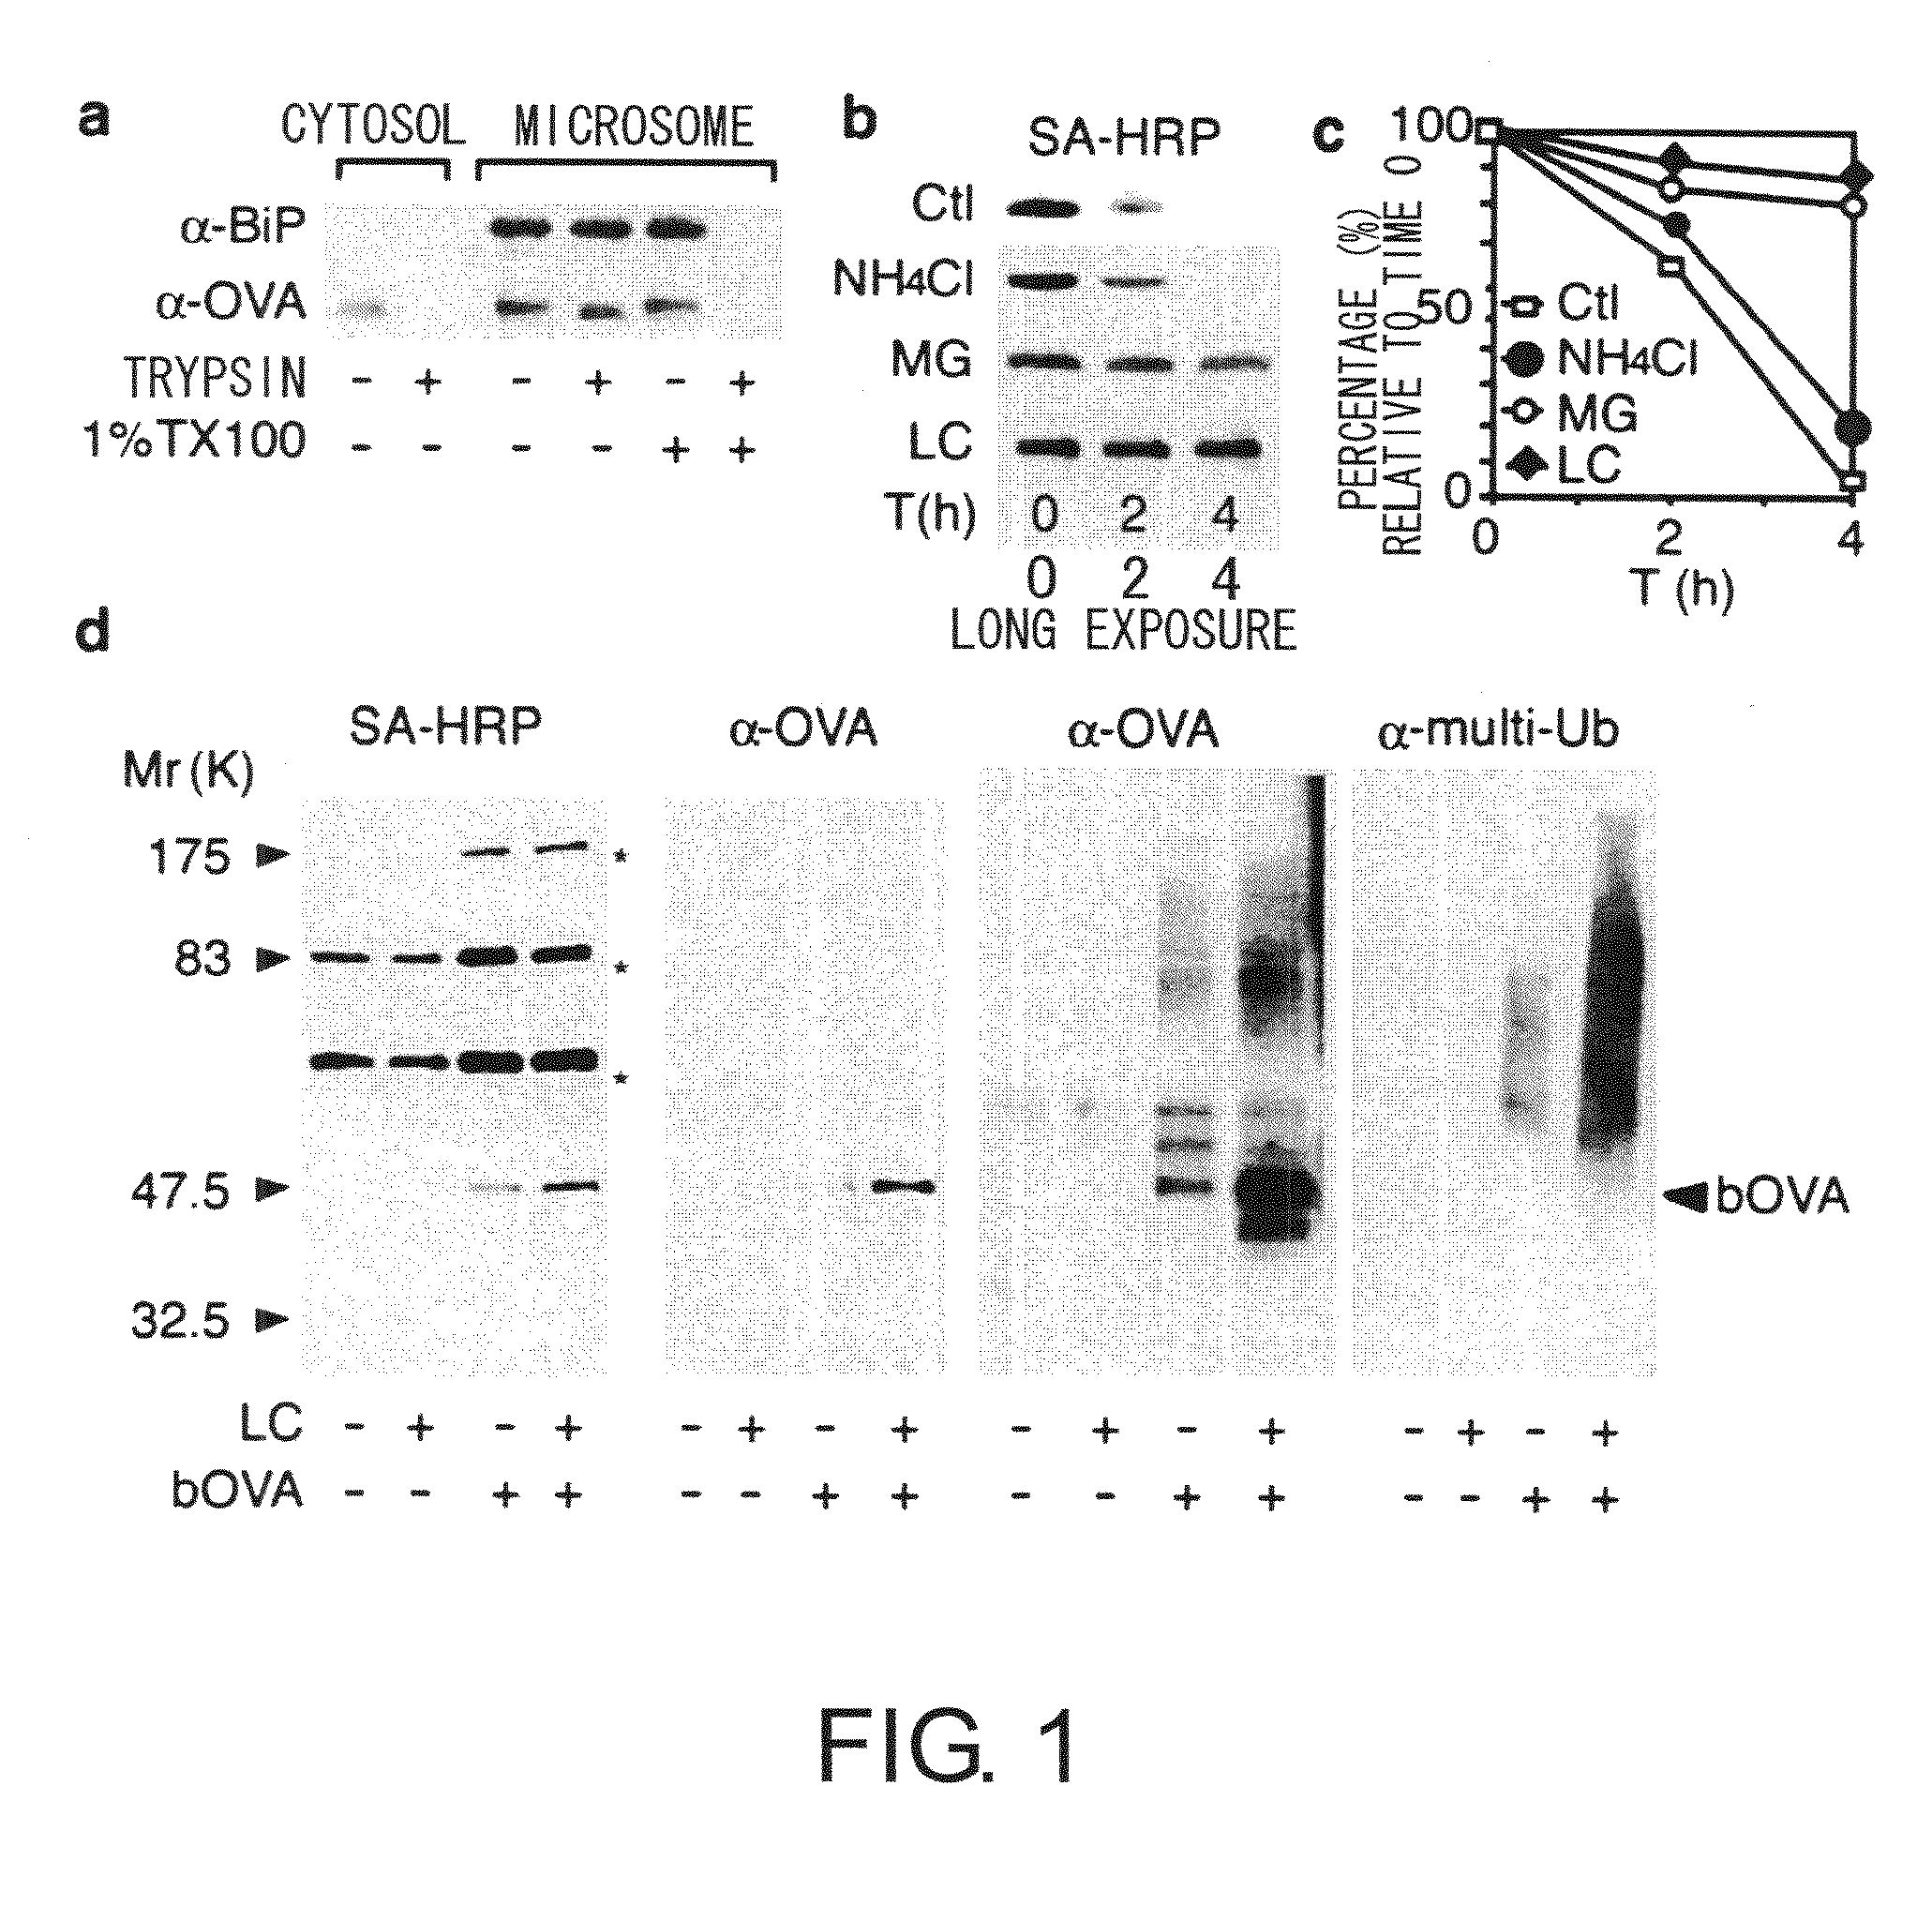 Methods For Producing Dendritic Cells That Have Acquired Ctl-Inducing Ability